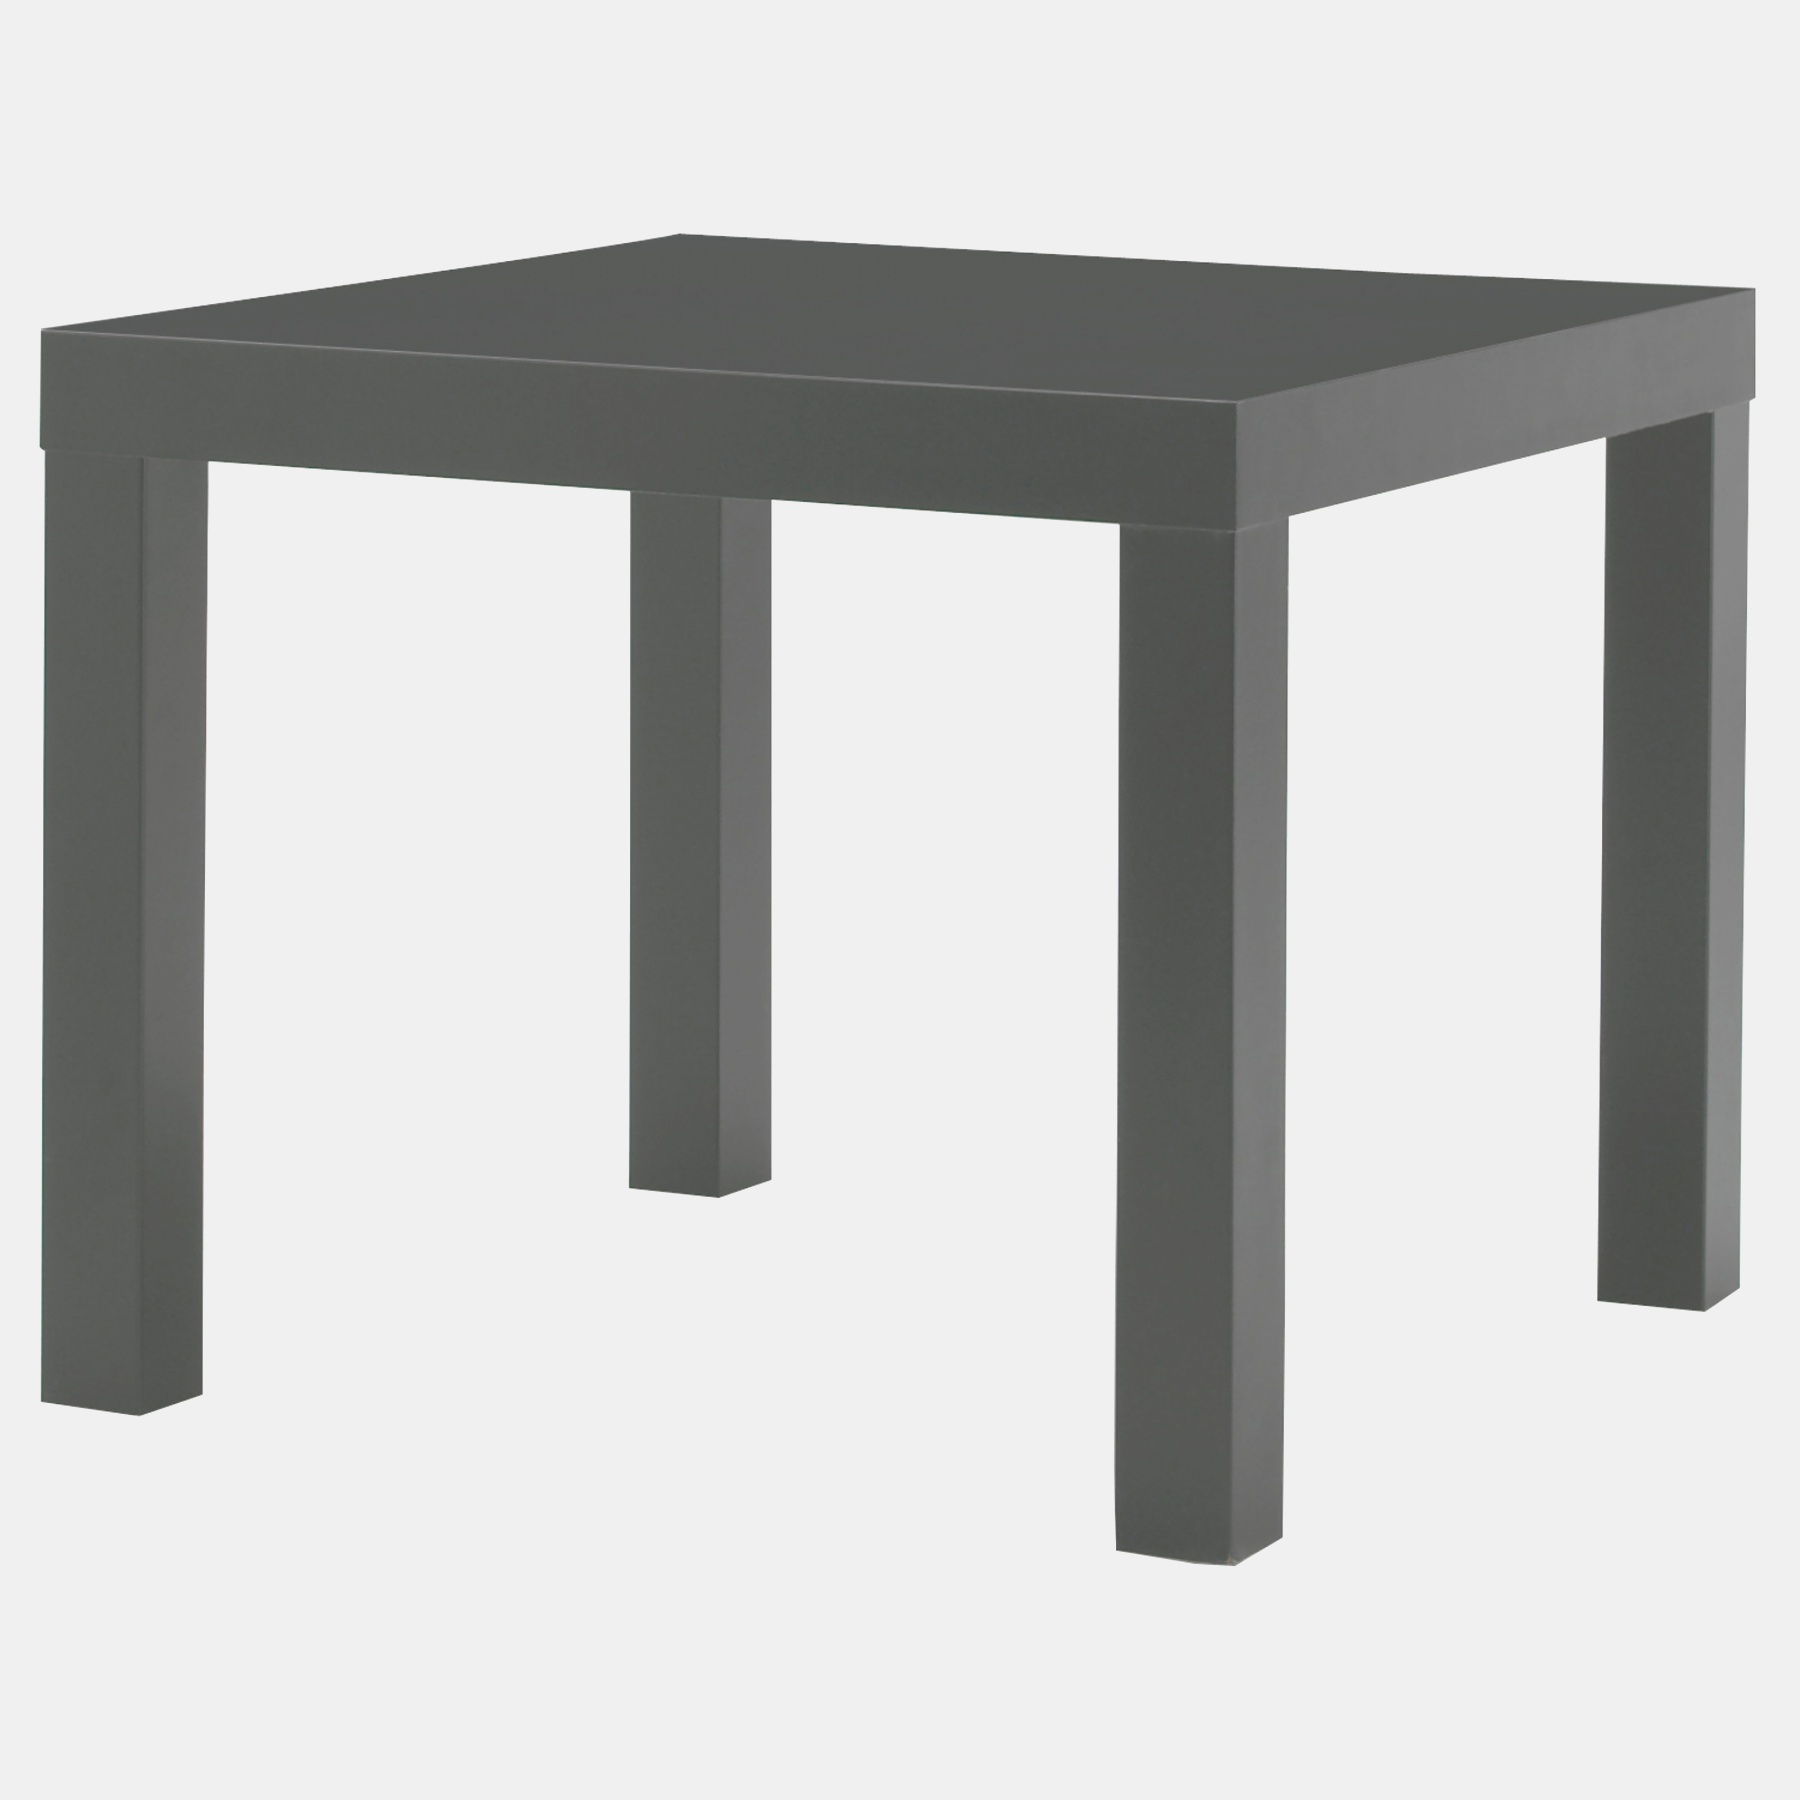 low table | LACK Side table Black 55x55 cm - IKEA | low table